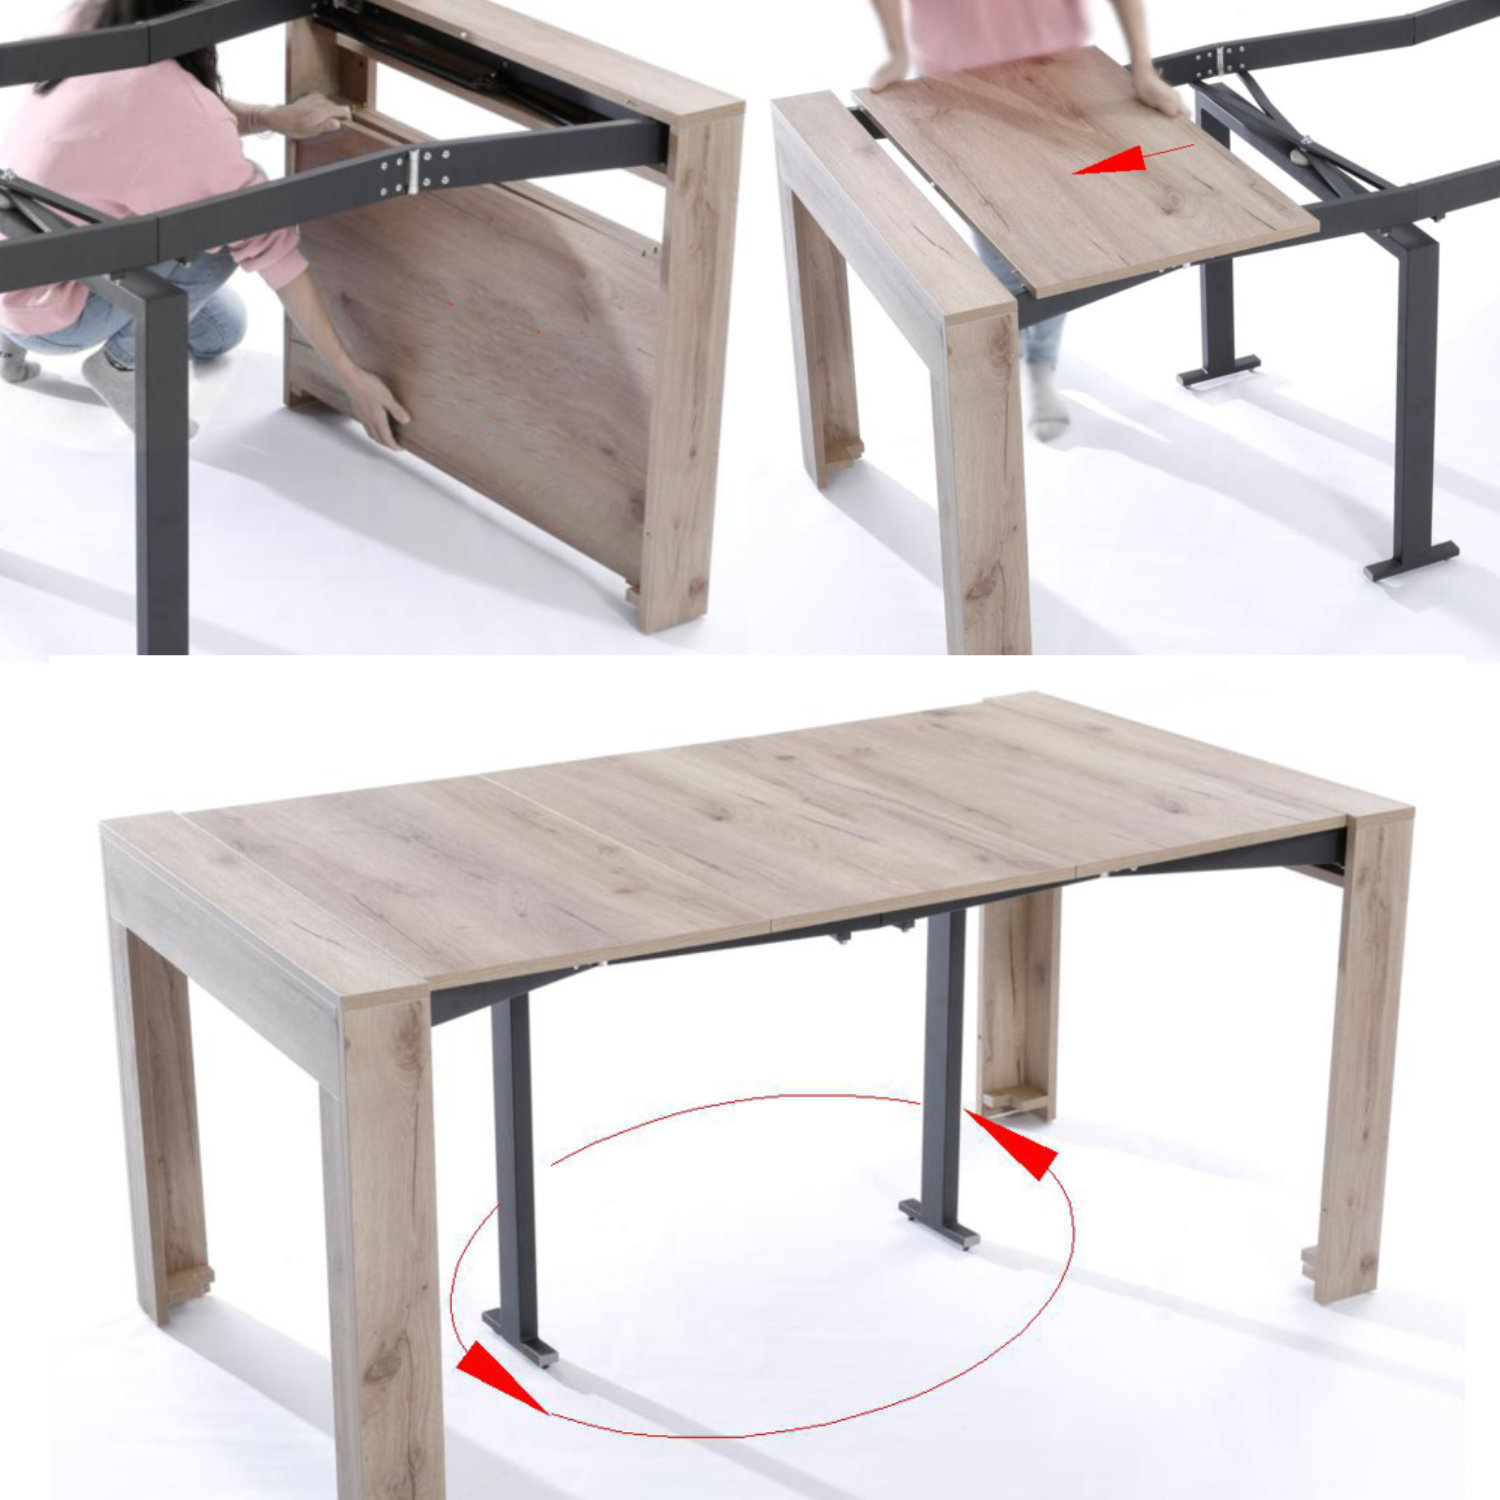 Expanda table extended with self storing extensions added to expand